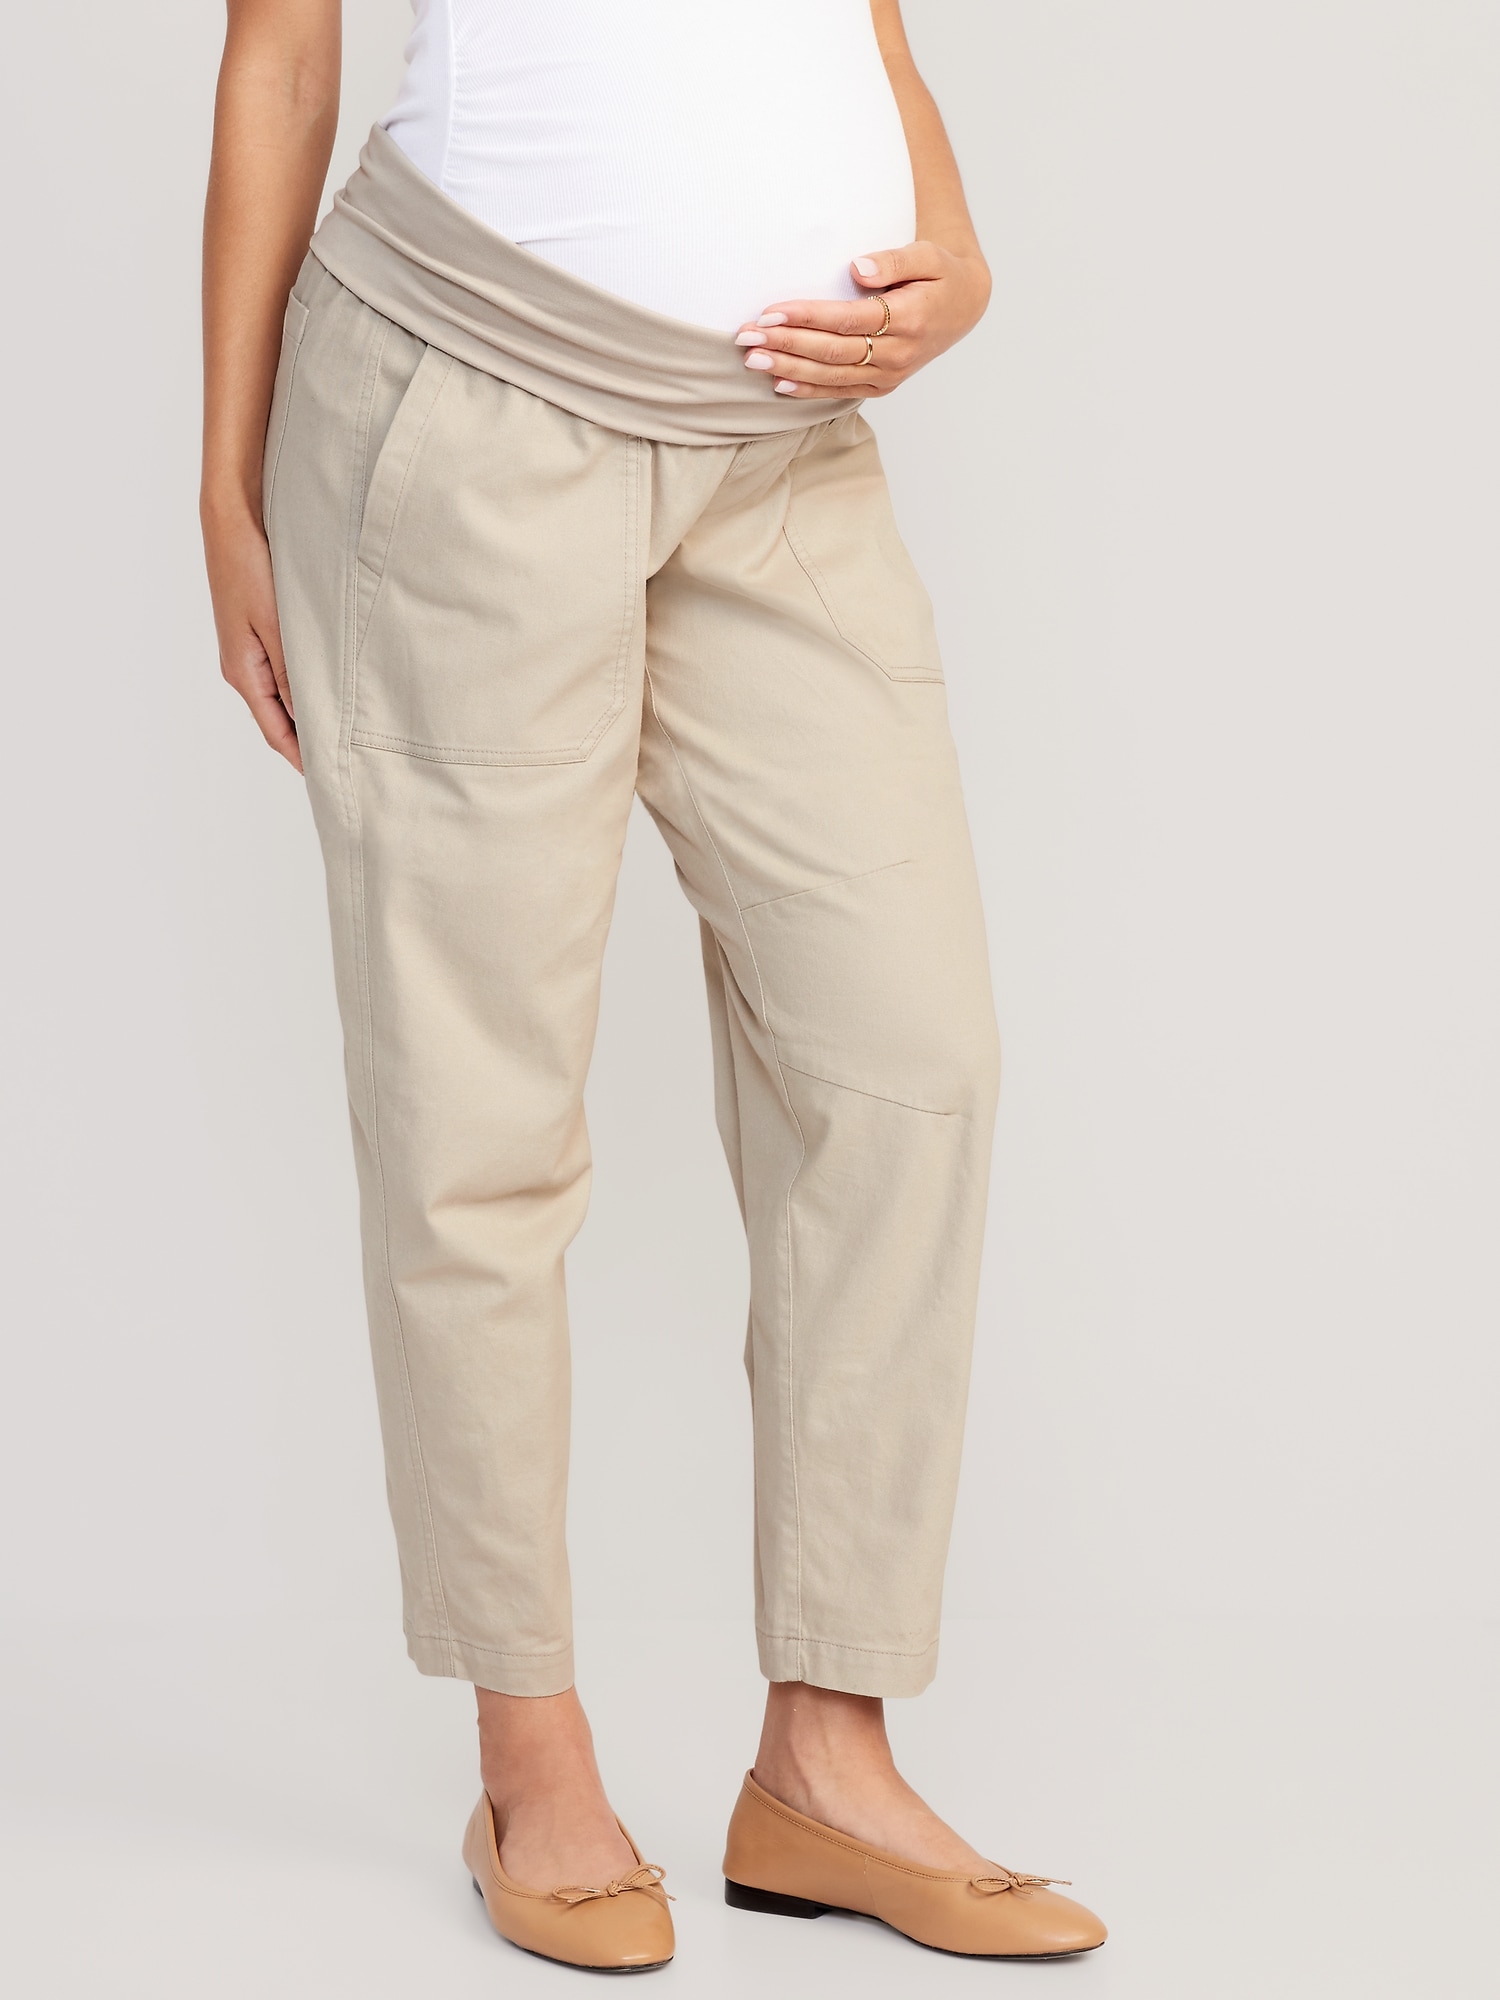 Work Pants With Tummy Control